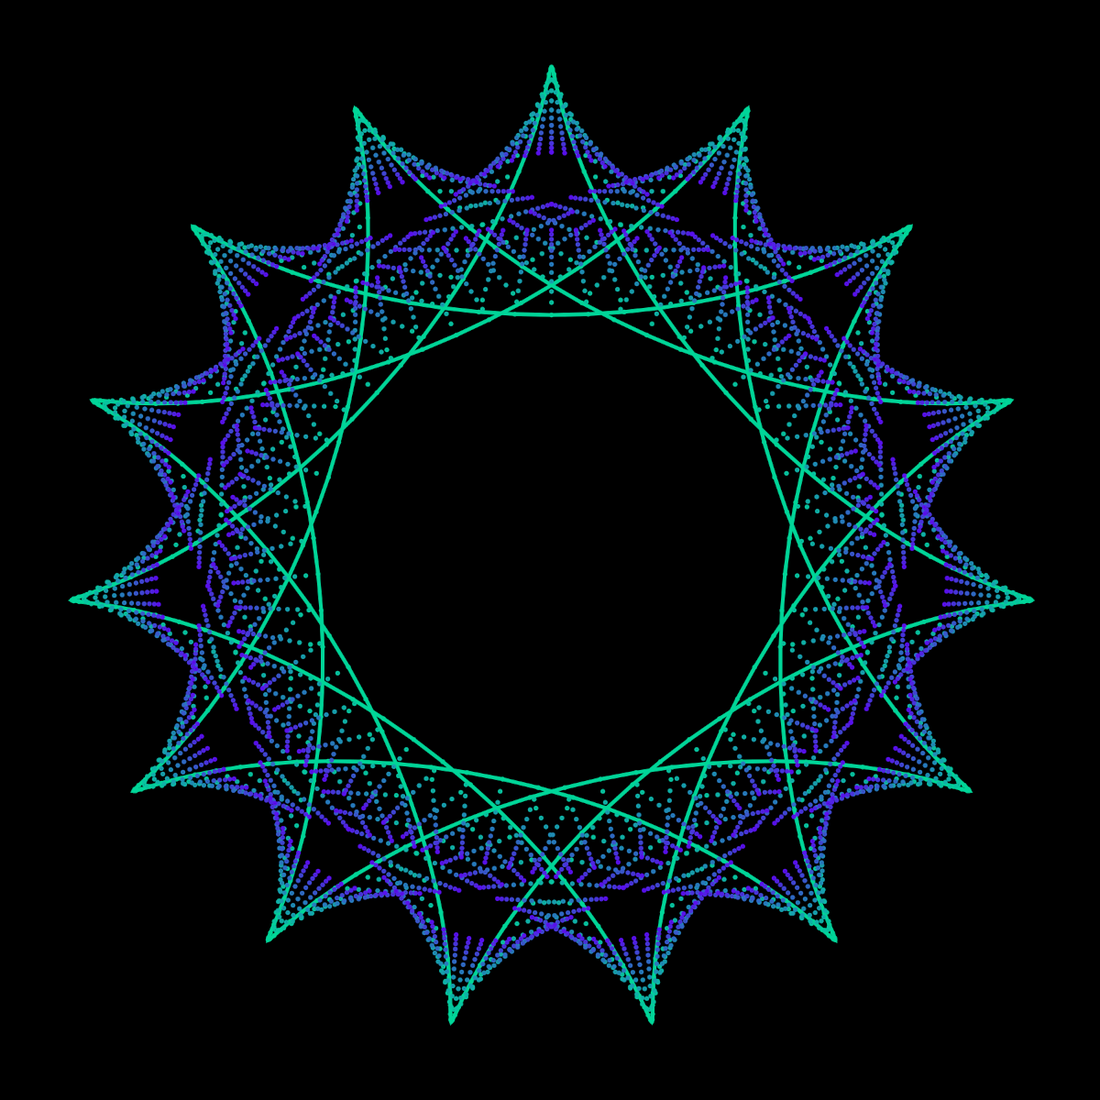 A collection of hypocycloid curves with 15-fold symmetry, represented as green and blue dots on a black background